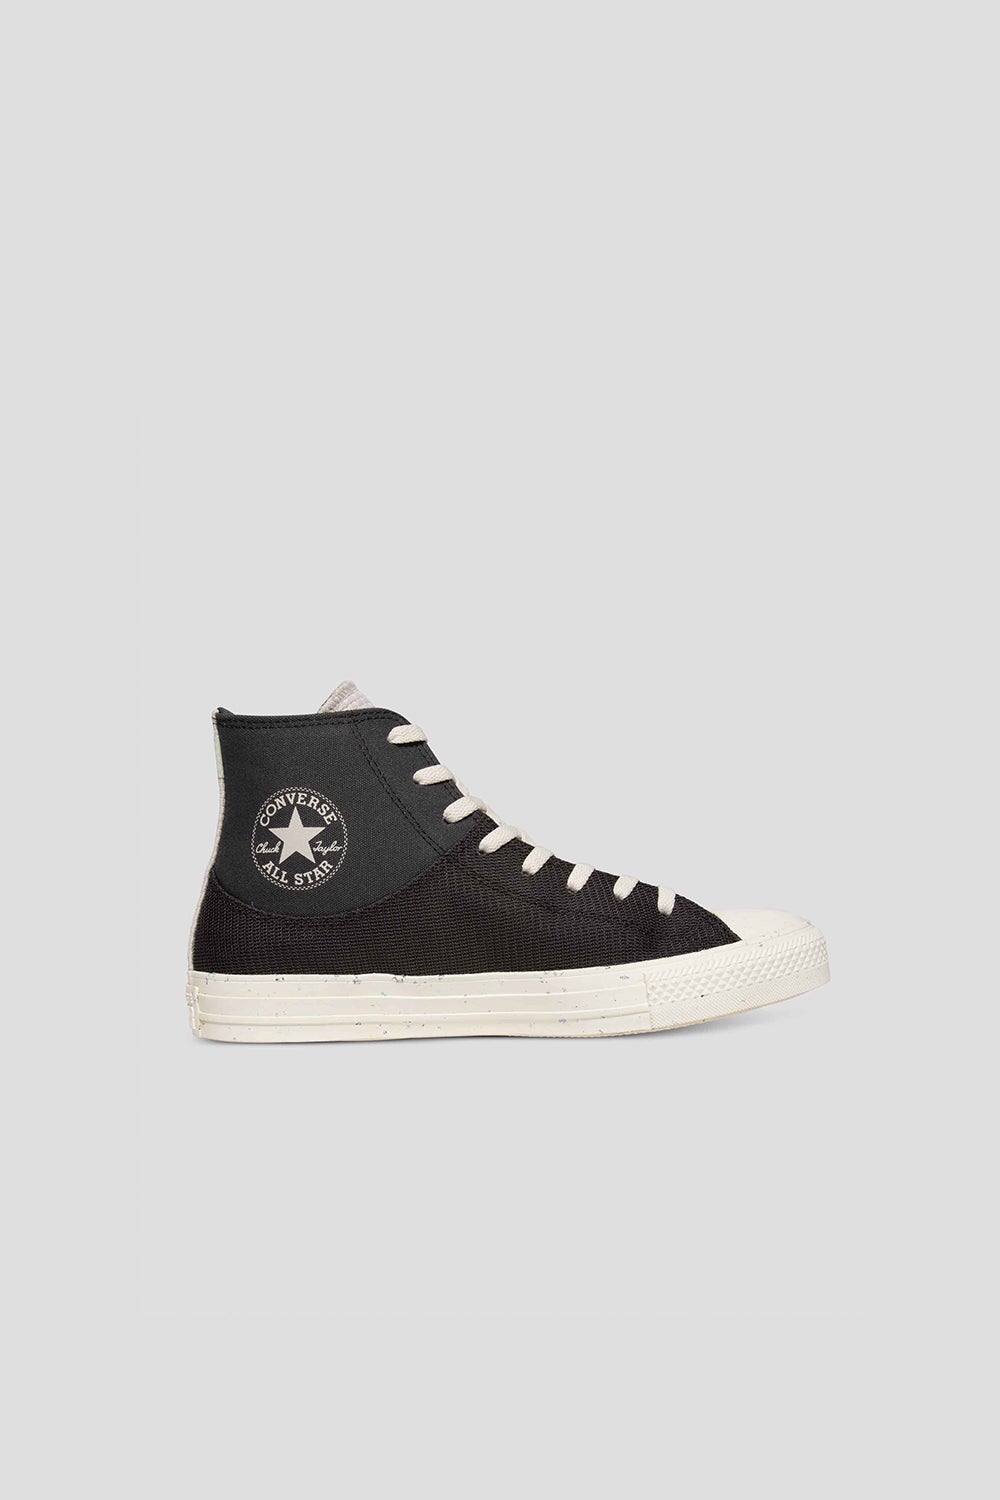 Converse Chuck Taylor All Star Recycled Woven & Canvas High Top Storm Wind